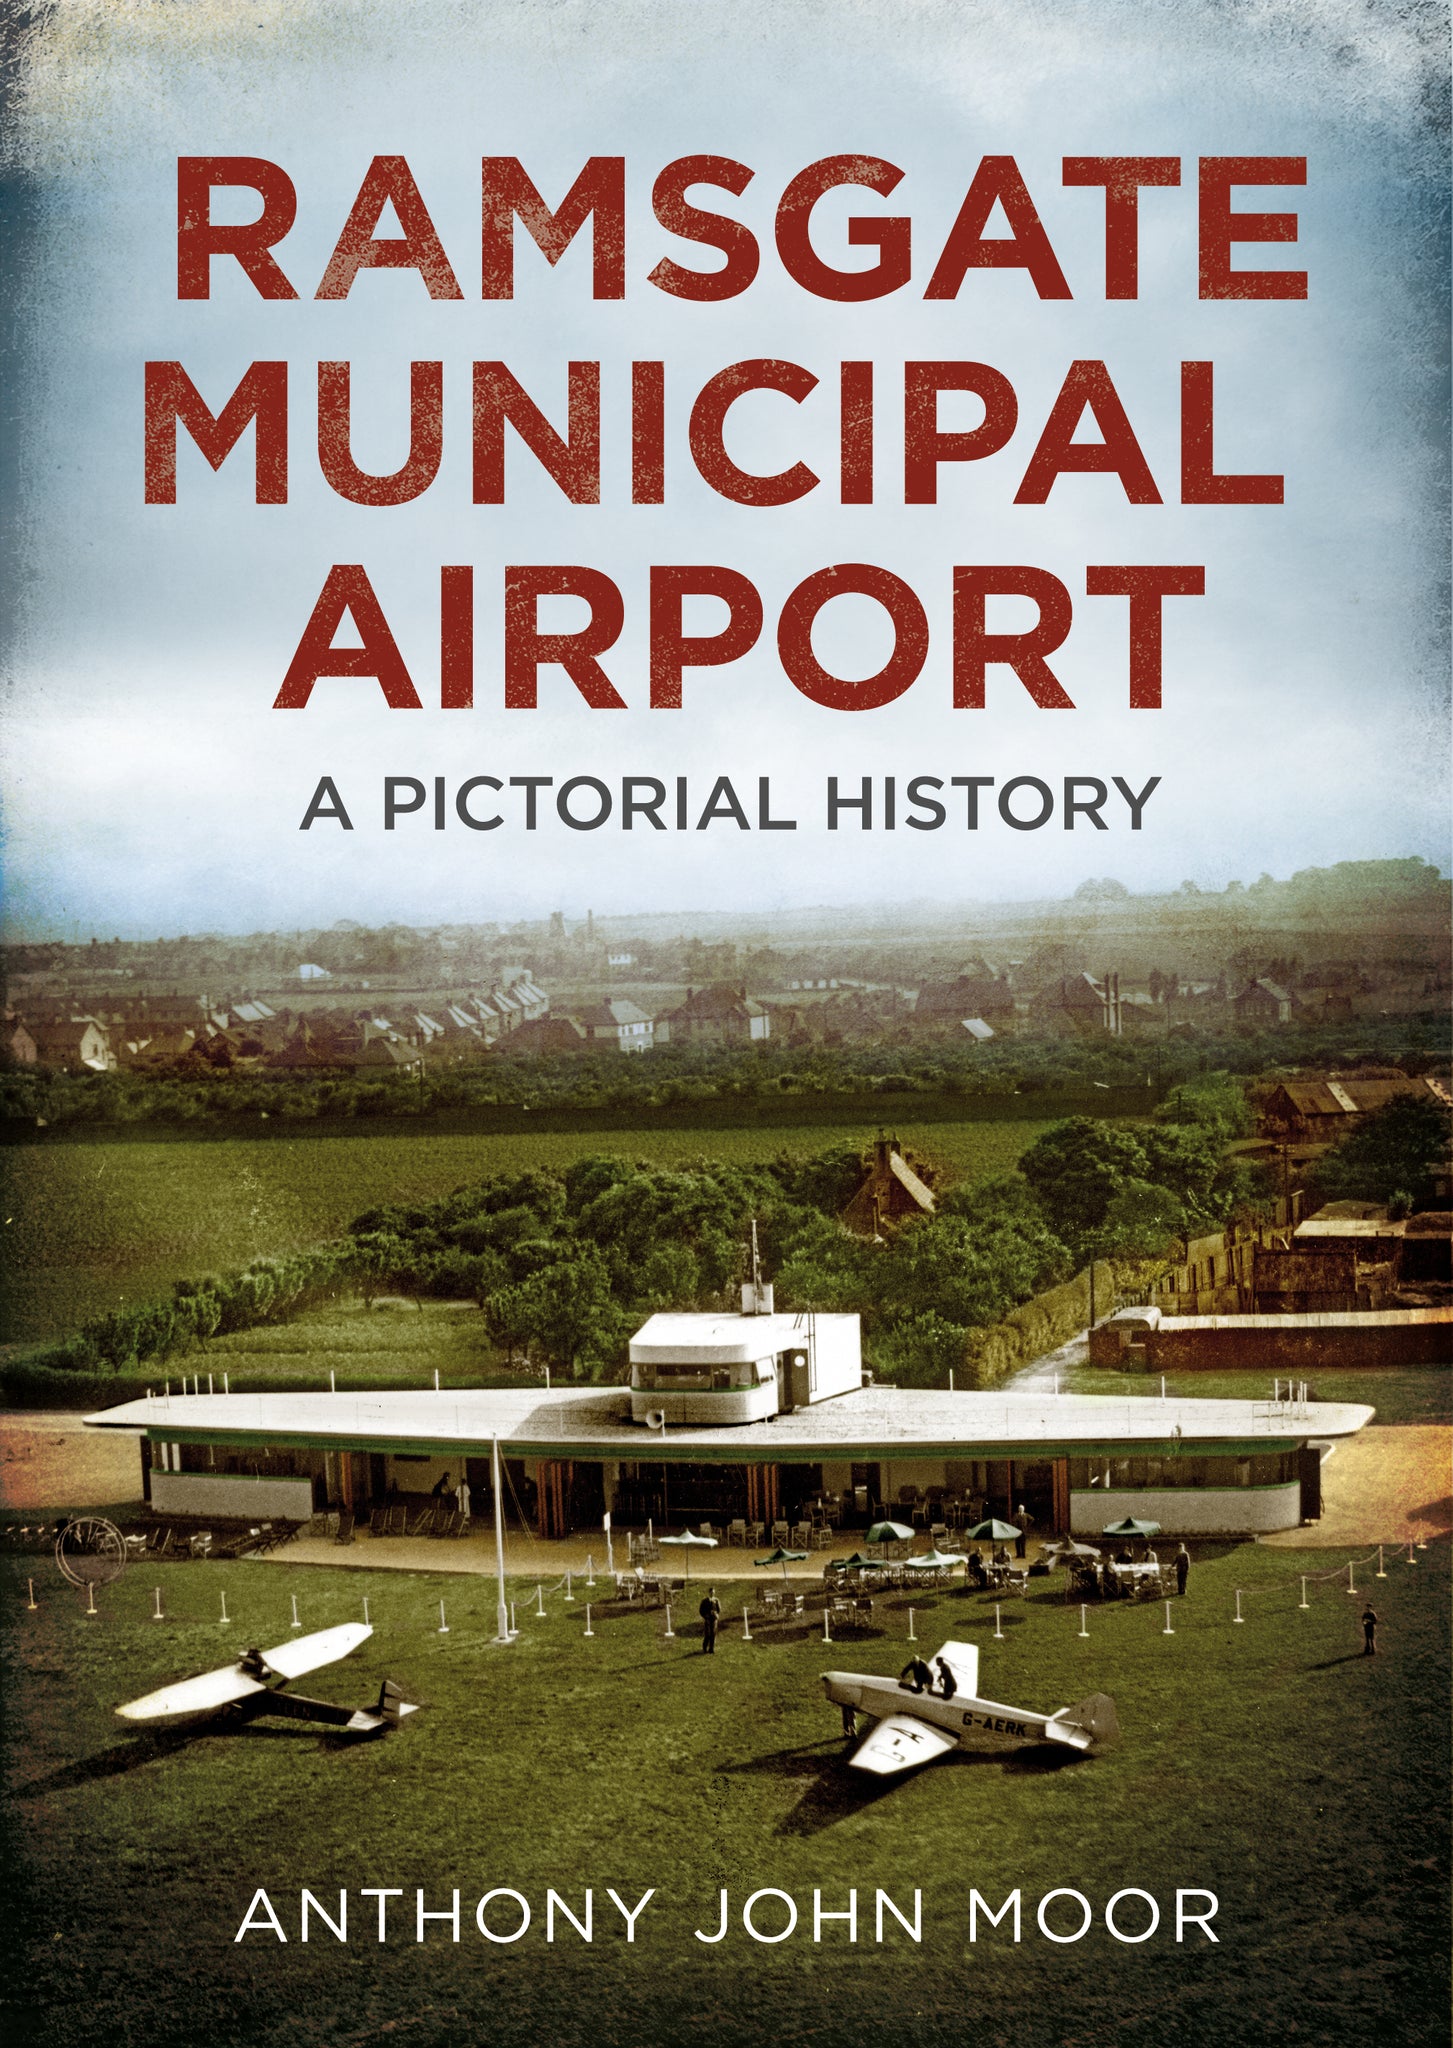 Ramsgate Municipal Airport: A Pictorial History - available now from Fonthill Media